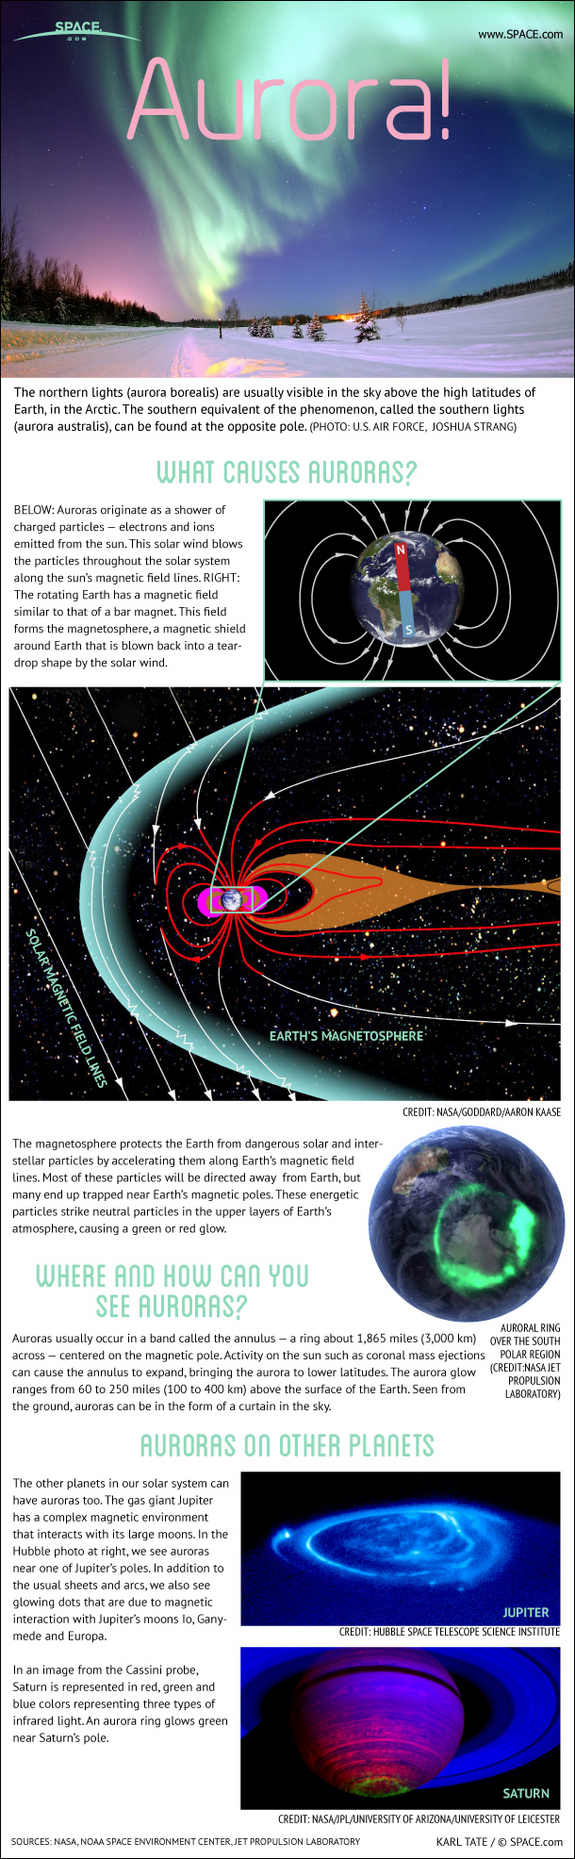 Find out where to see sky-filling aurora lights, in this SPACE.com infographic.